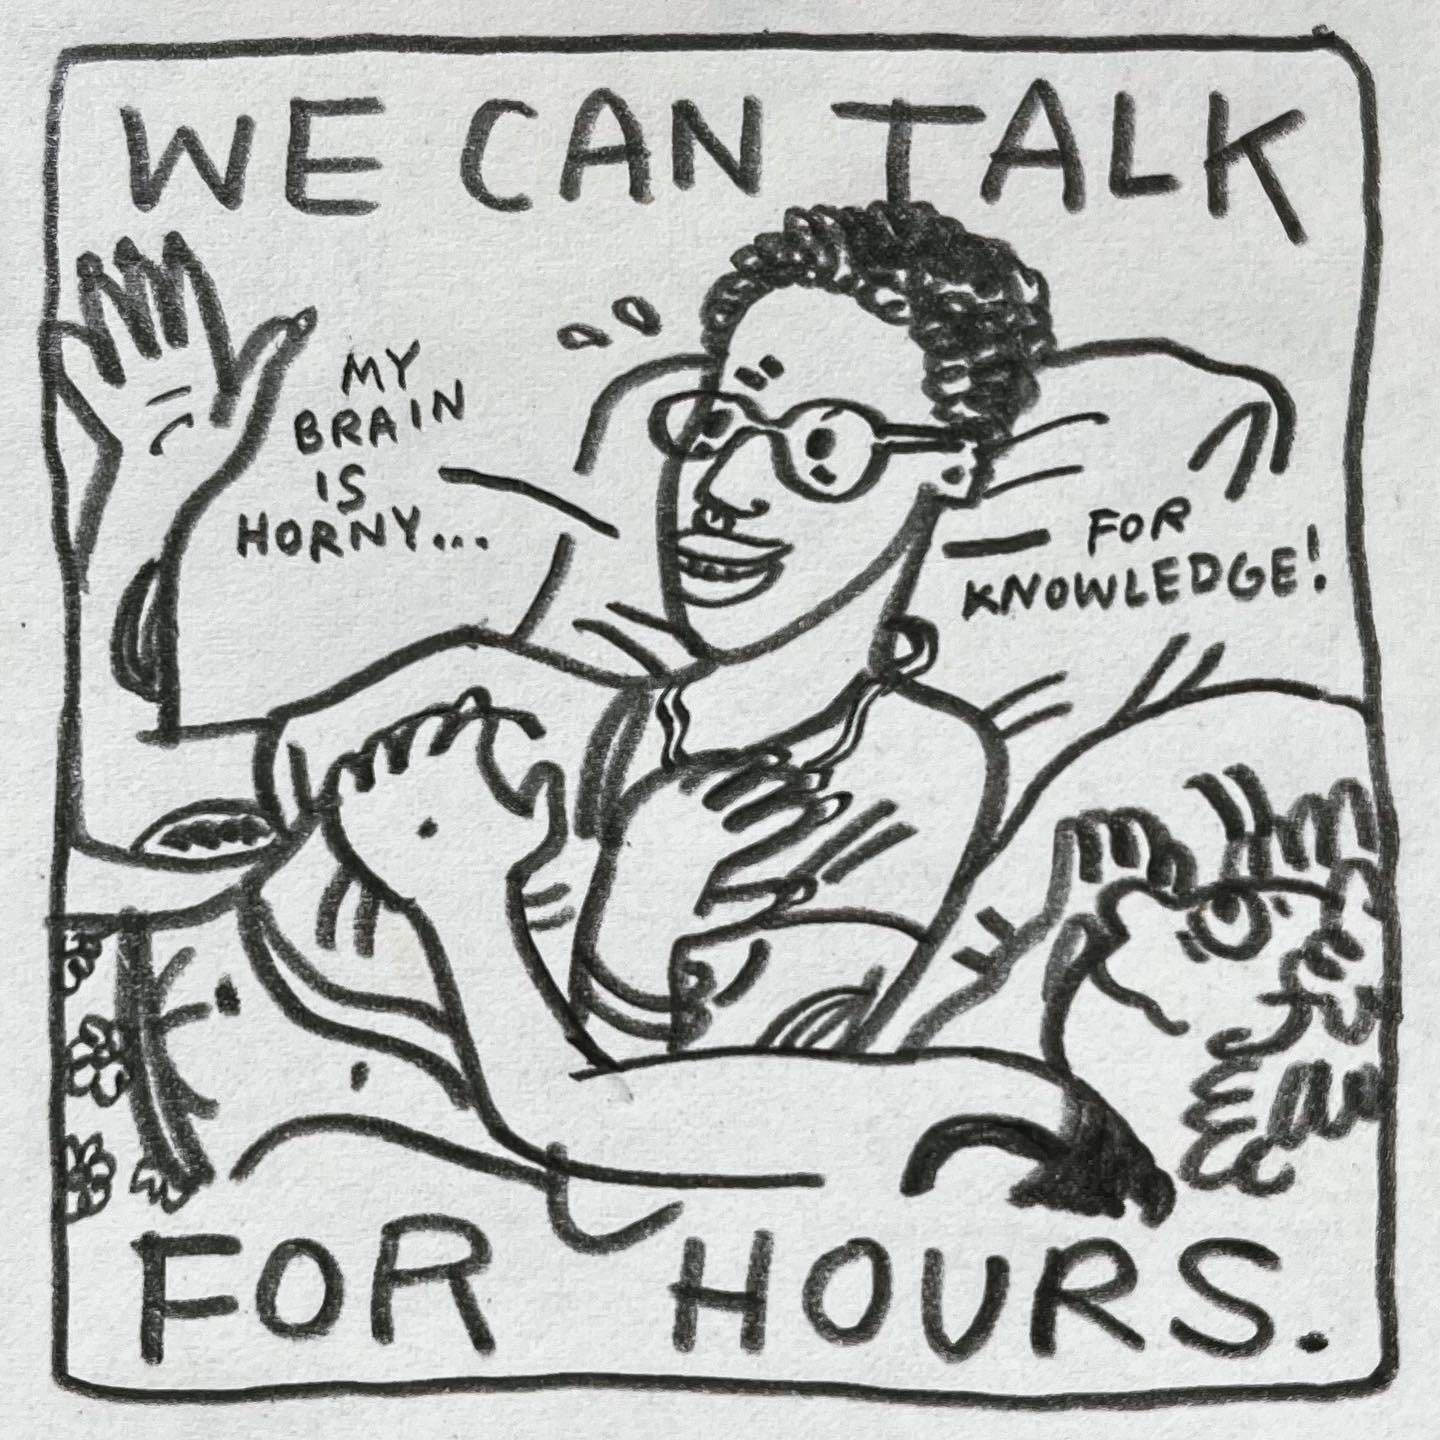 Panel 2: we can talk for hours. Image: Maze and Lark lay on a bed together. Lark has one hand resting on Maze’s boob, looking up at them lovingly. Maze is gesturing, excited. They say "my brain is horny… for knowledge!"